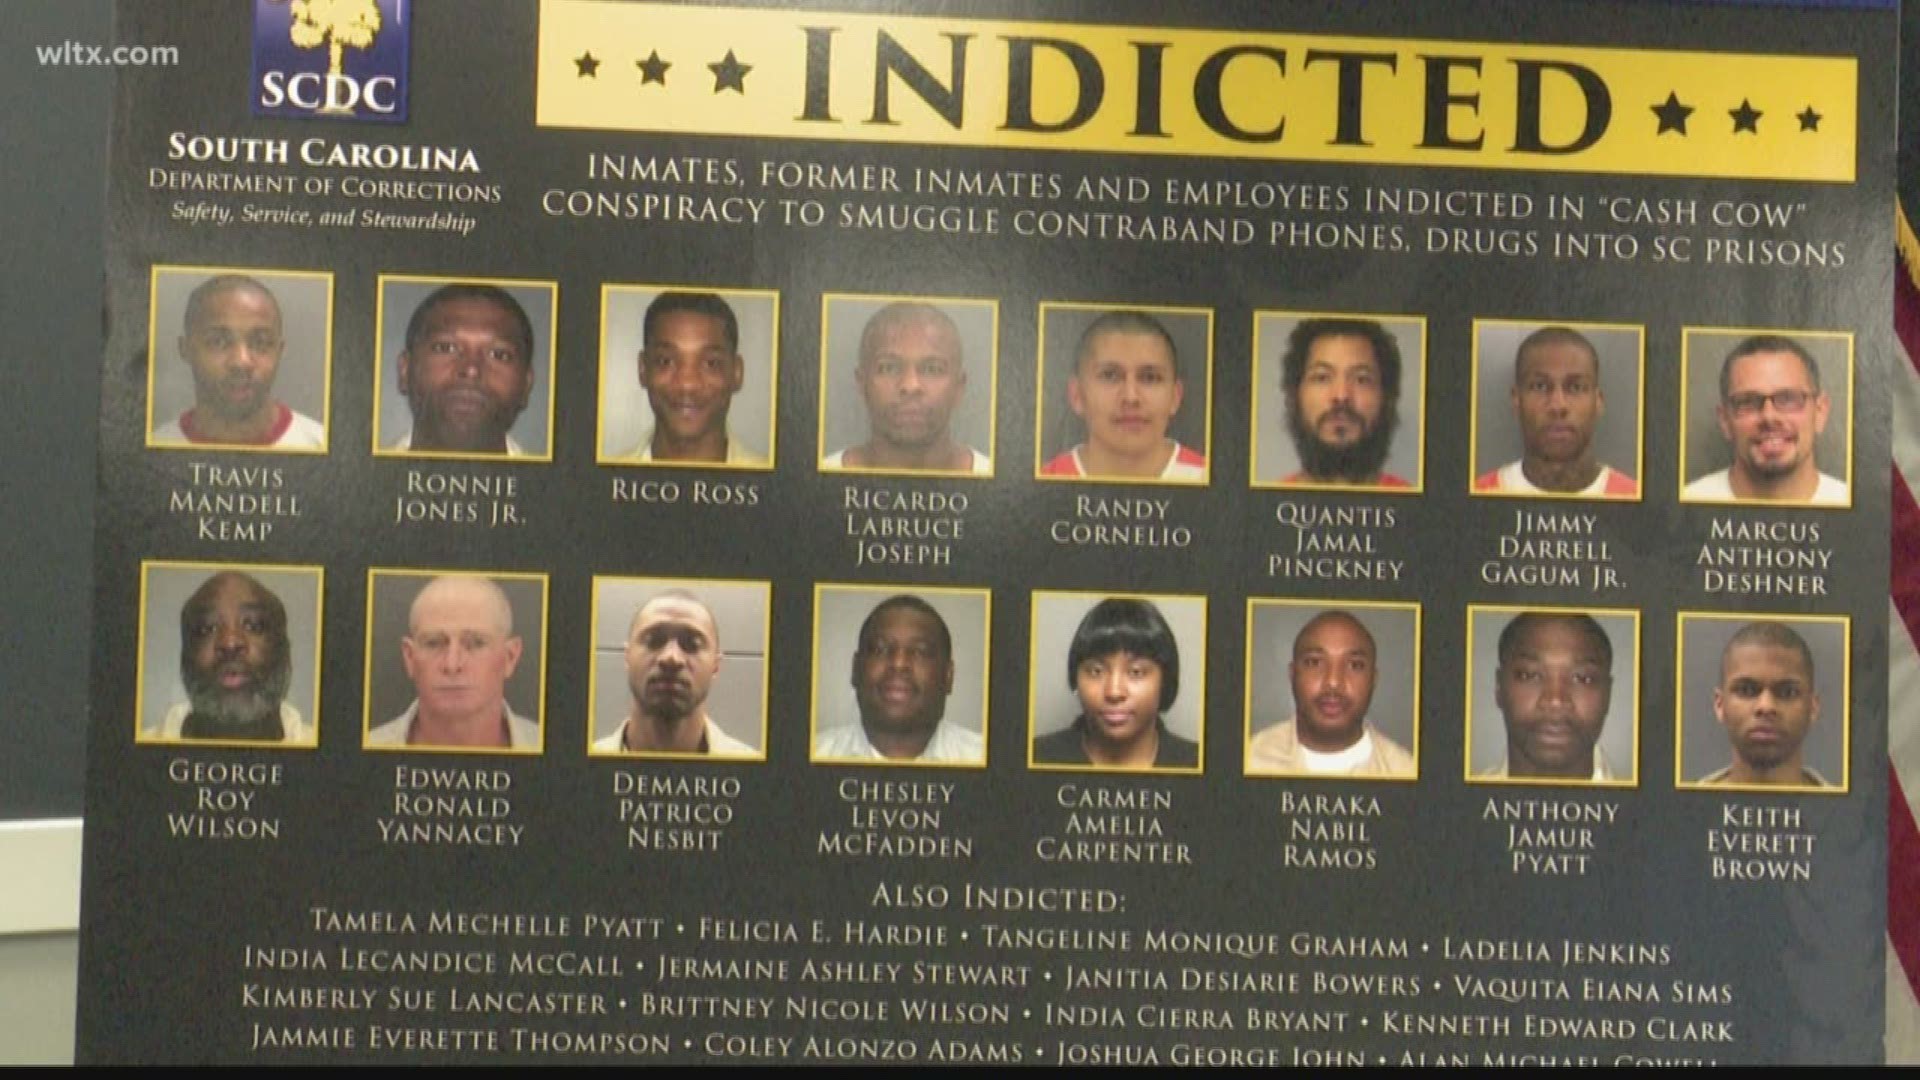 21 indicted for smuggling items into South Carolina prisons